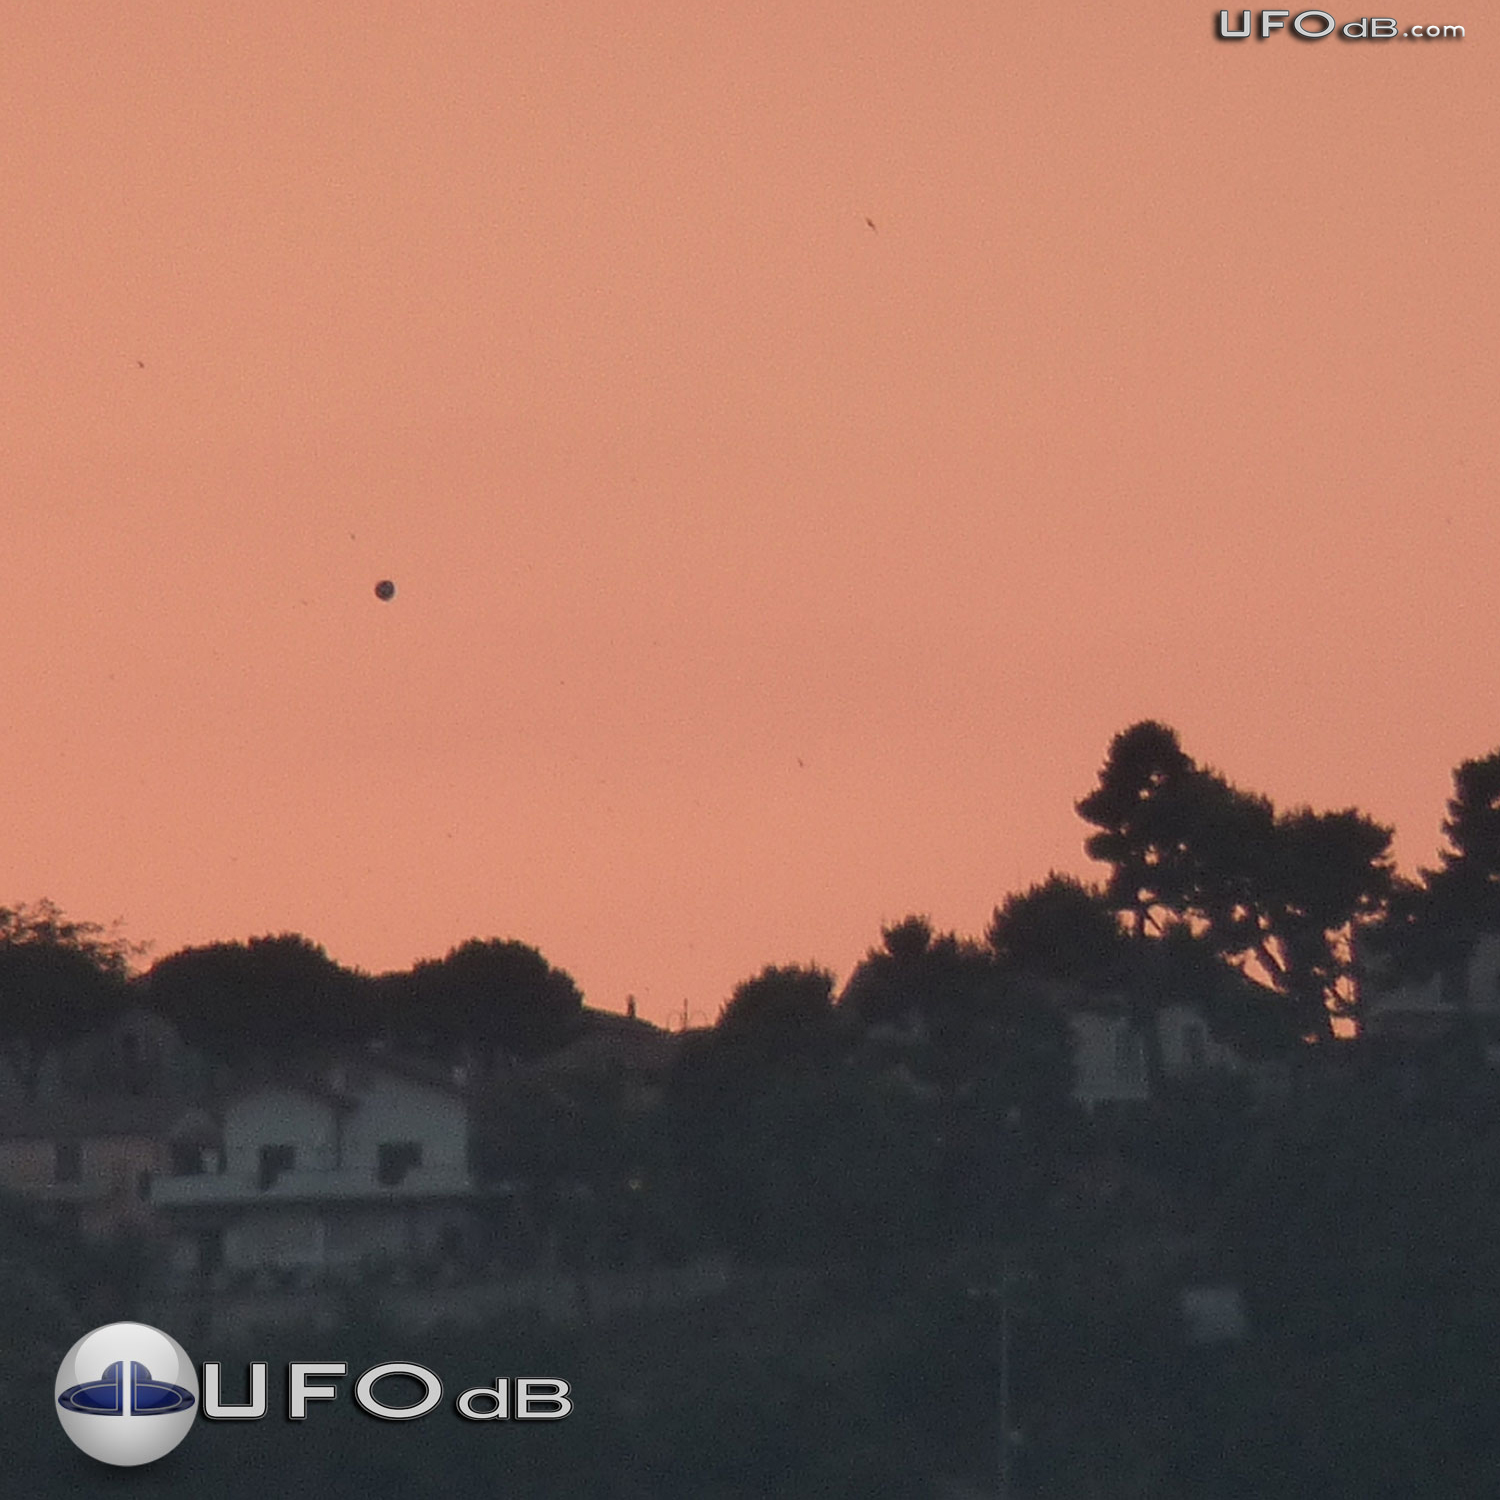 Teramo, Abruzzo visited by spherical UFO at sundown | Italy July 2011 UFO Picture #358-1